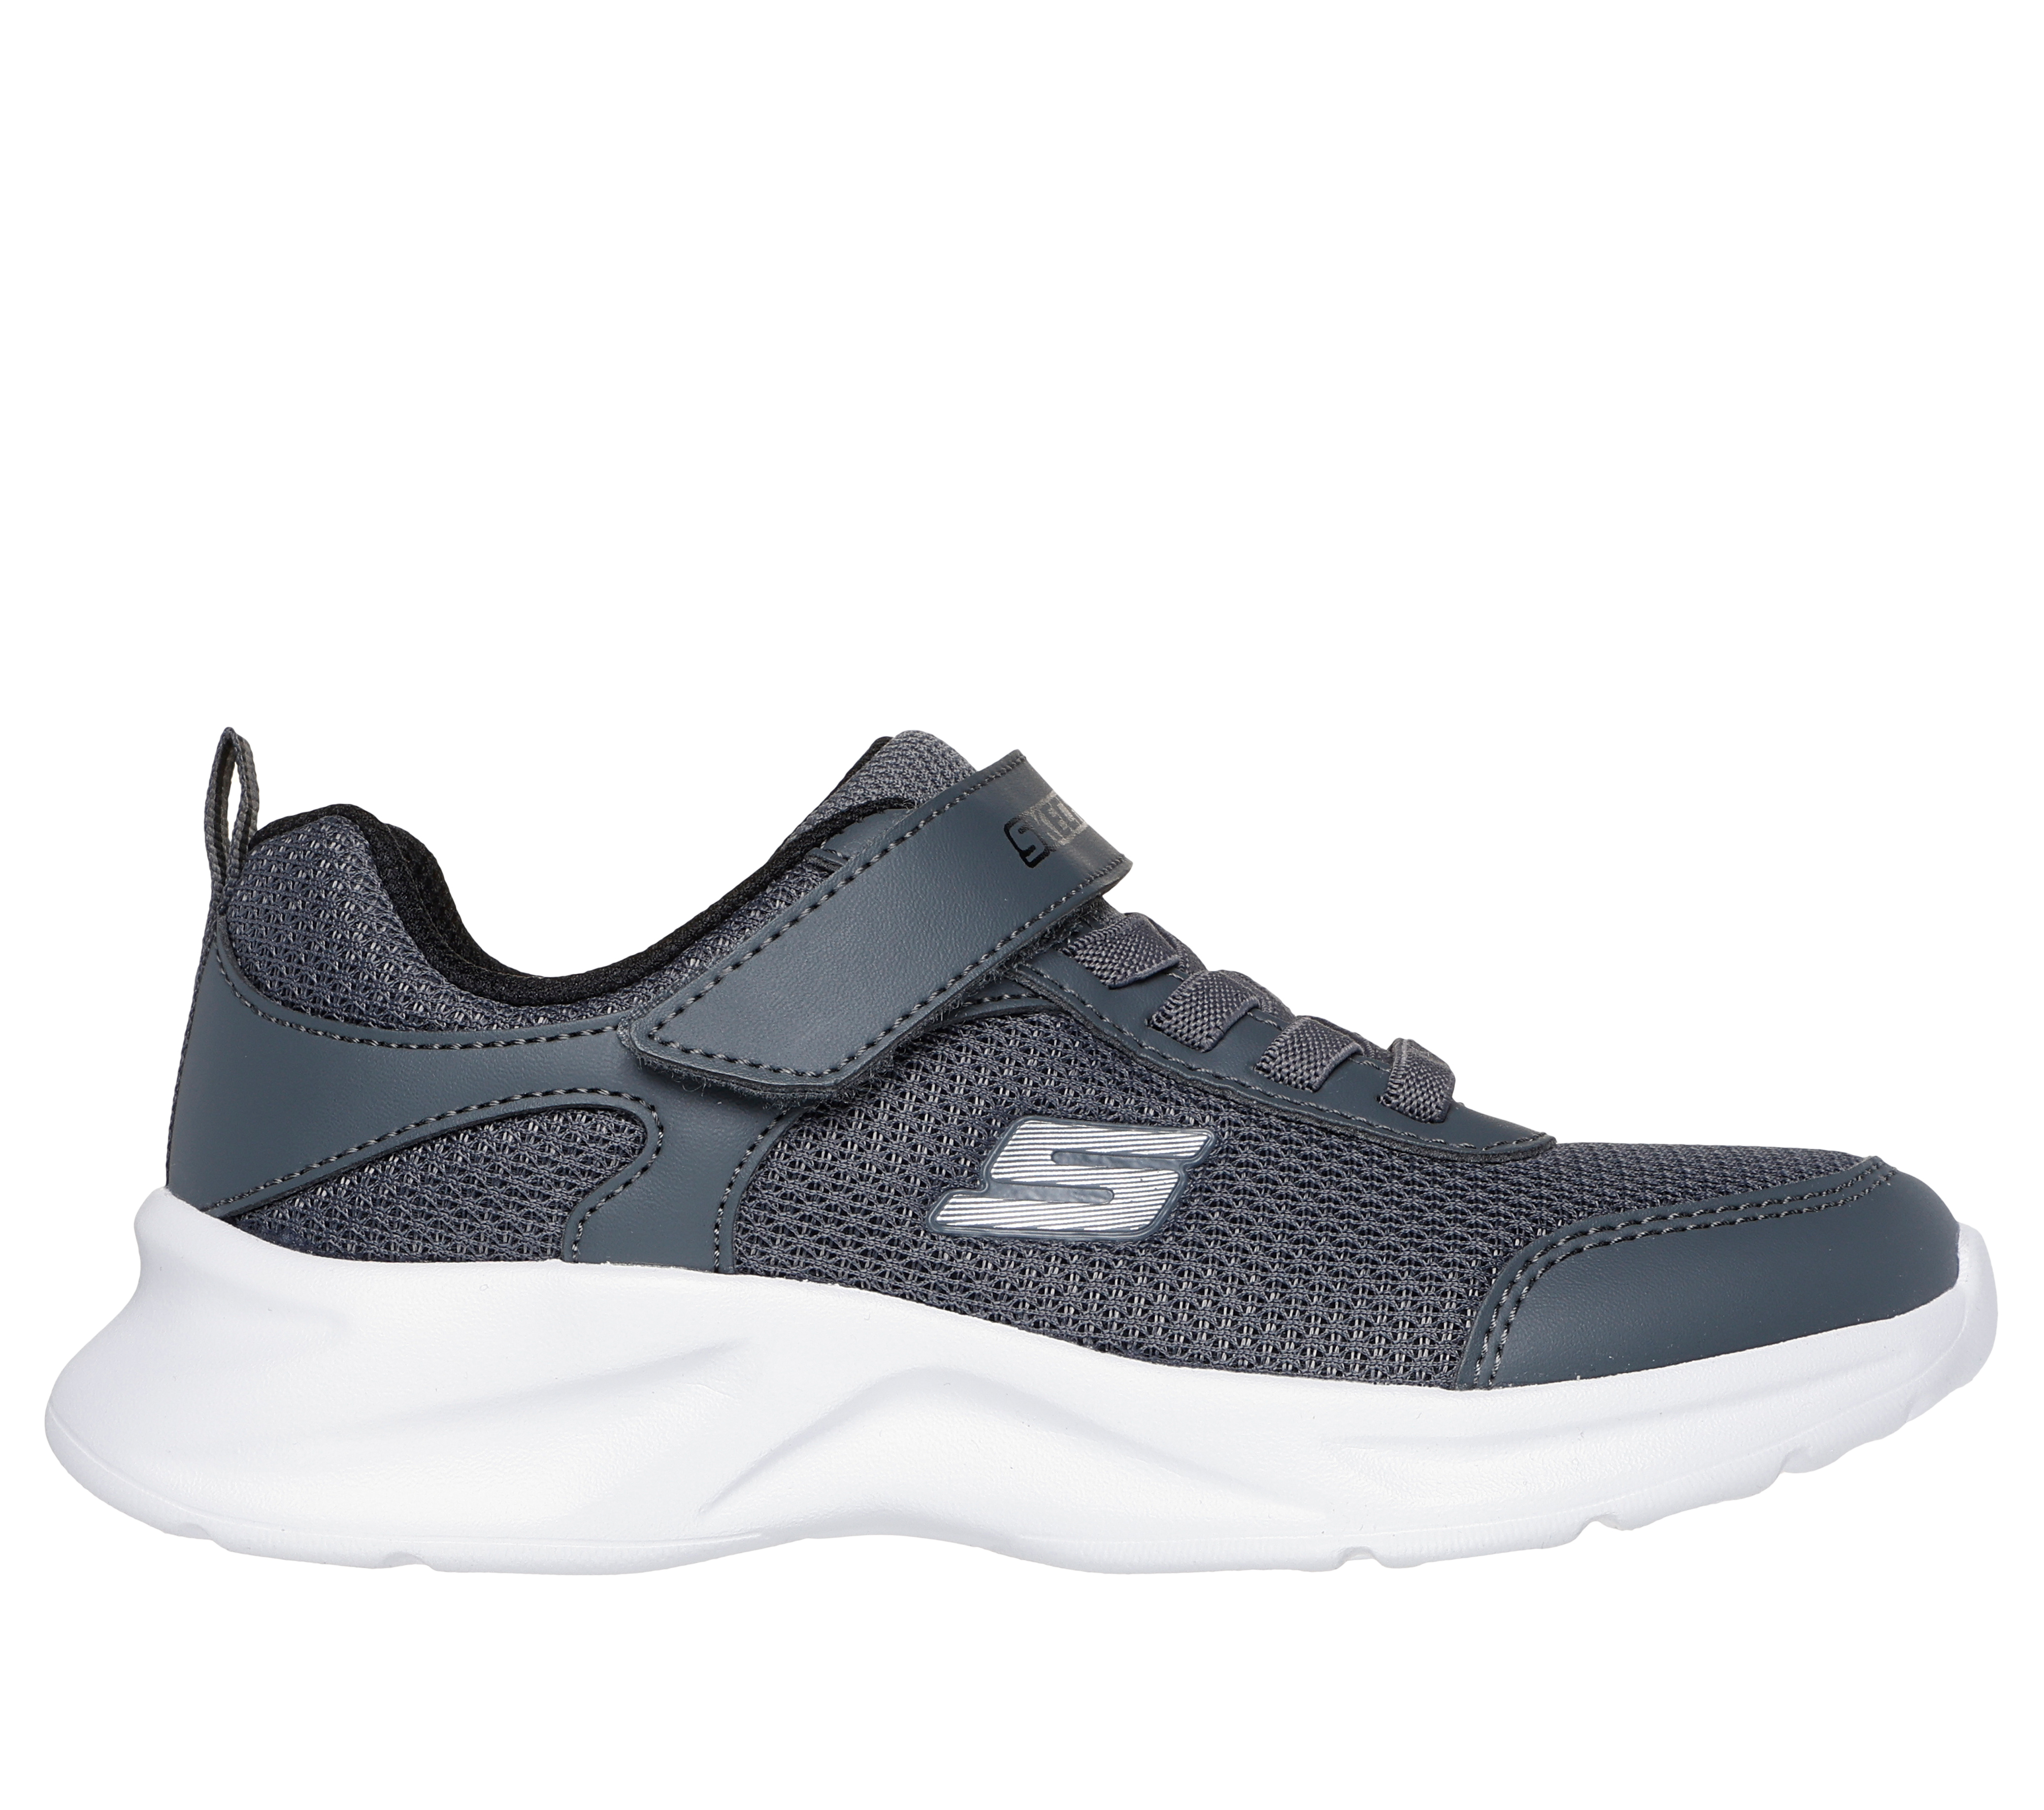 Skechers Boy's Dynamatic Sneaker Size 11.0 Charcoal Textile/Synthetic Machine Washable